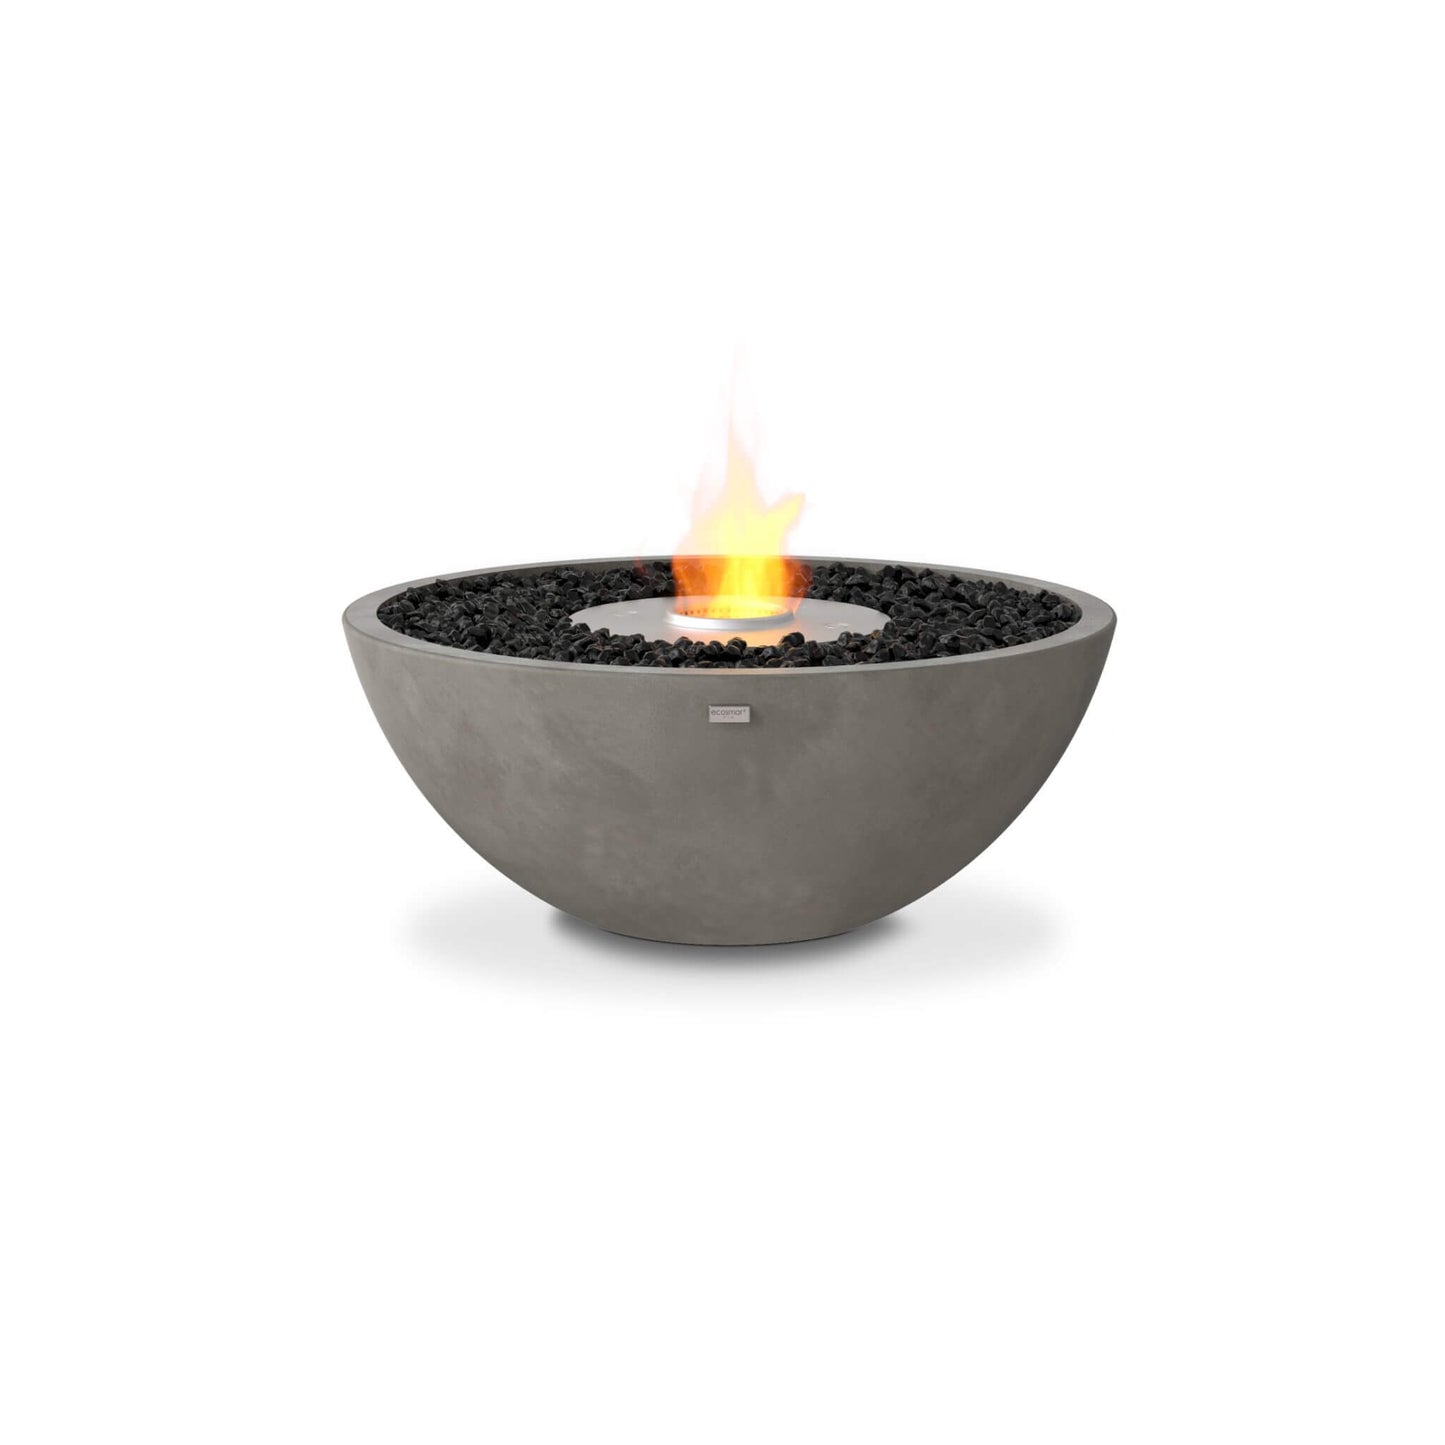 Ecosmart Fire Mix 850 bioethanol fire pit bowl in grey concrete with a stainless steel burner and decorative black charcoal